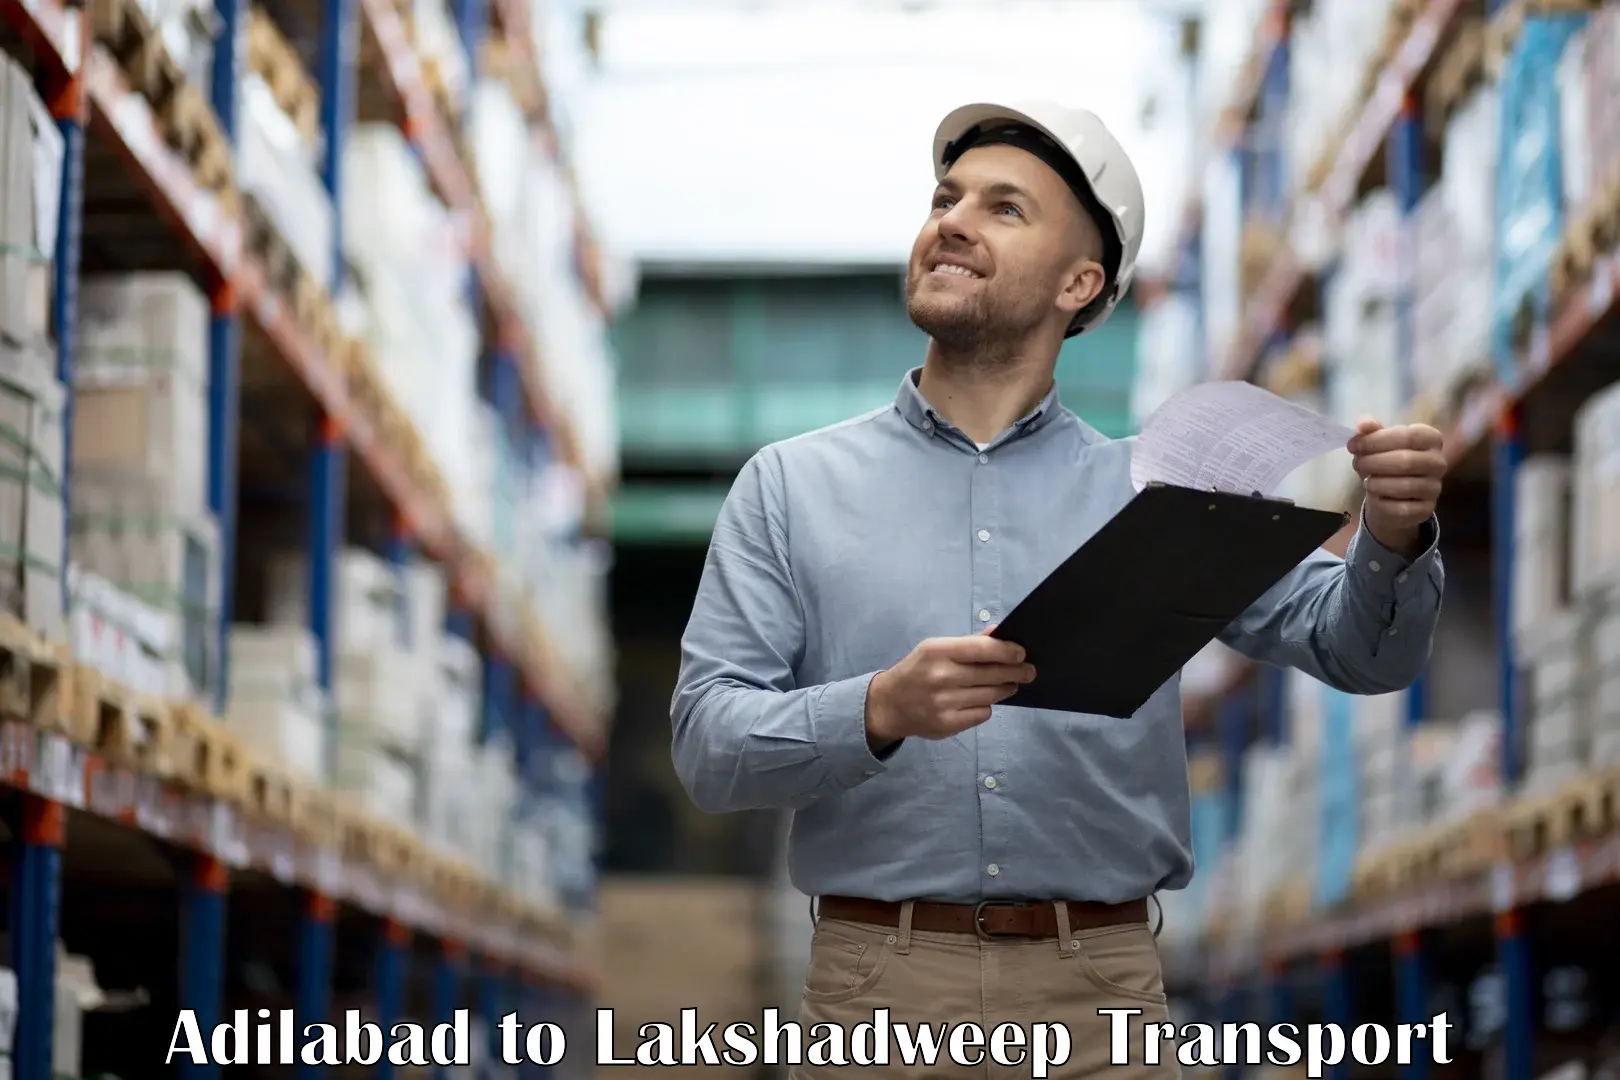 Commercial transport service Adilabad to Lakshadweep